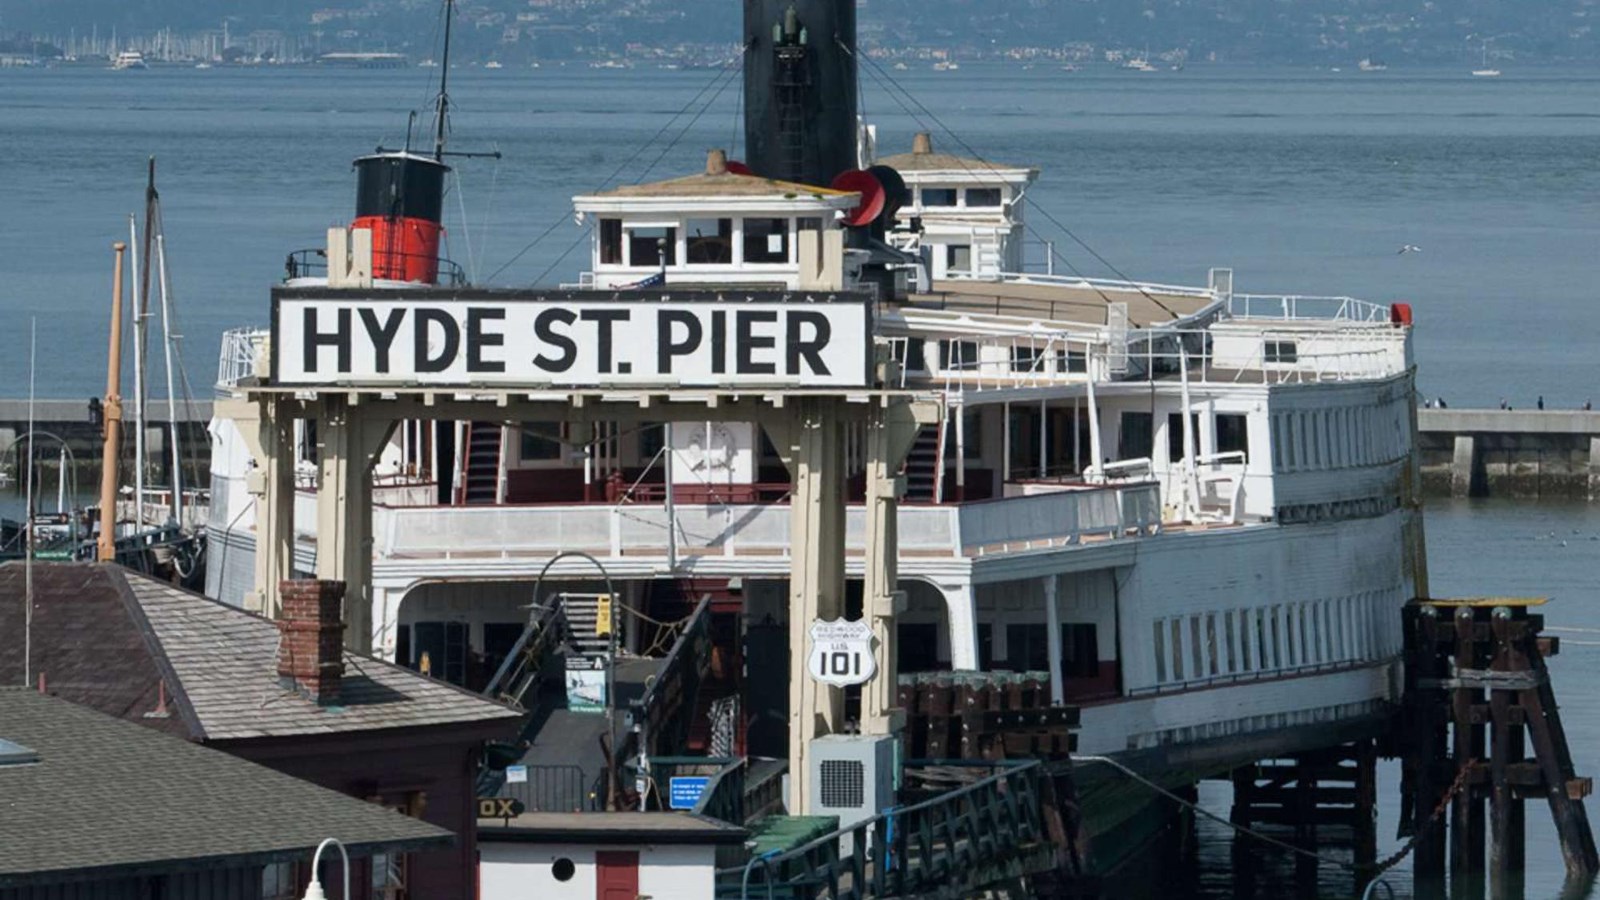  The Hyde Street Pier entry gate and sign,with the ferryboat Eureka behind.